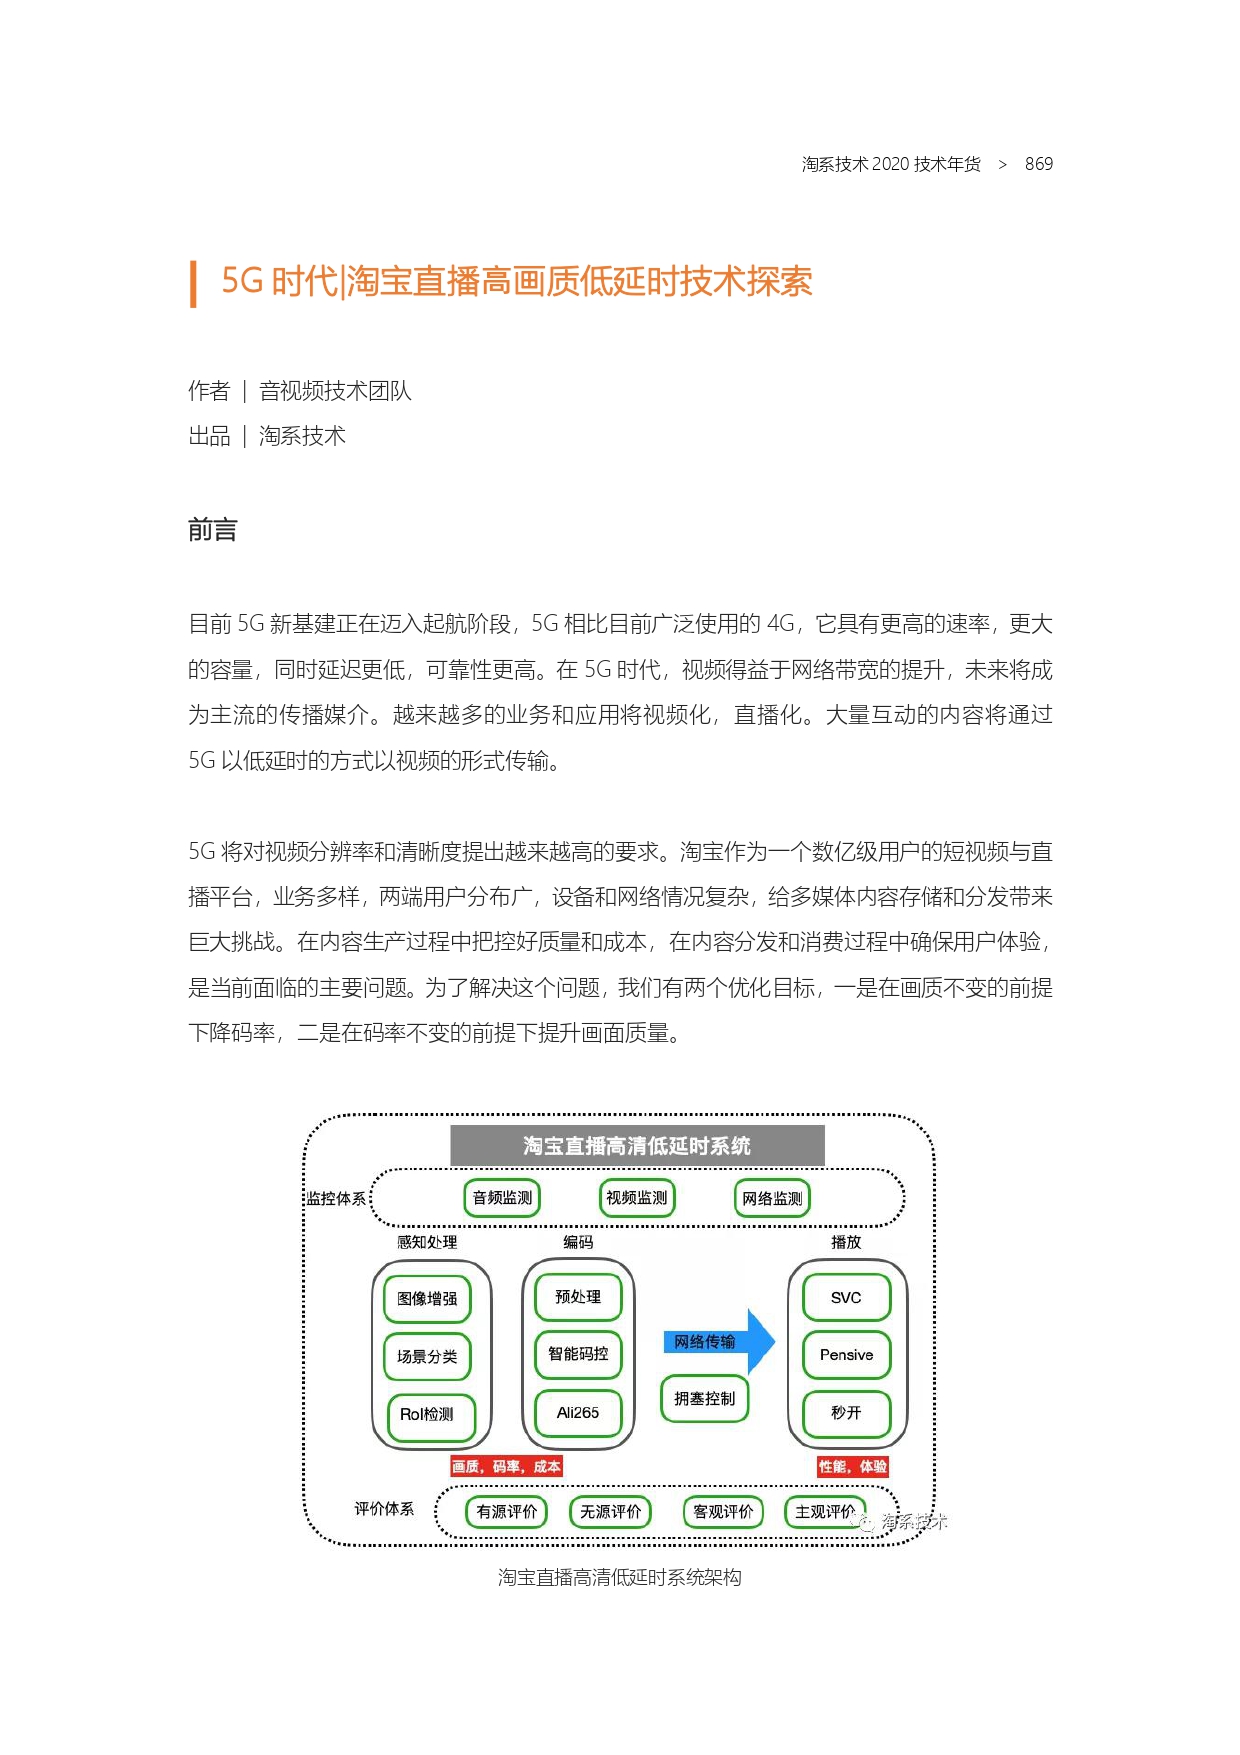 The Complete Works of Tao Technology 2020-571-1189-1-300_page-0299.jpg